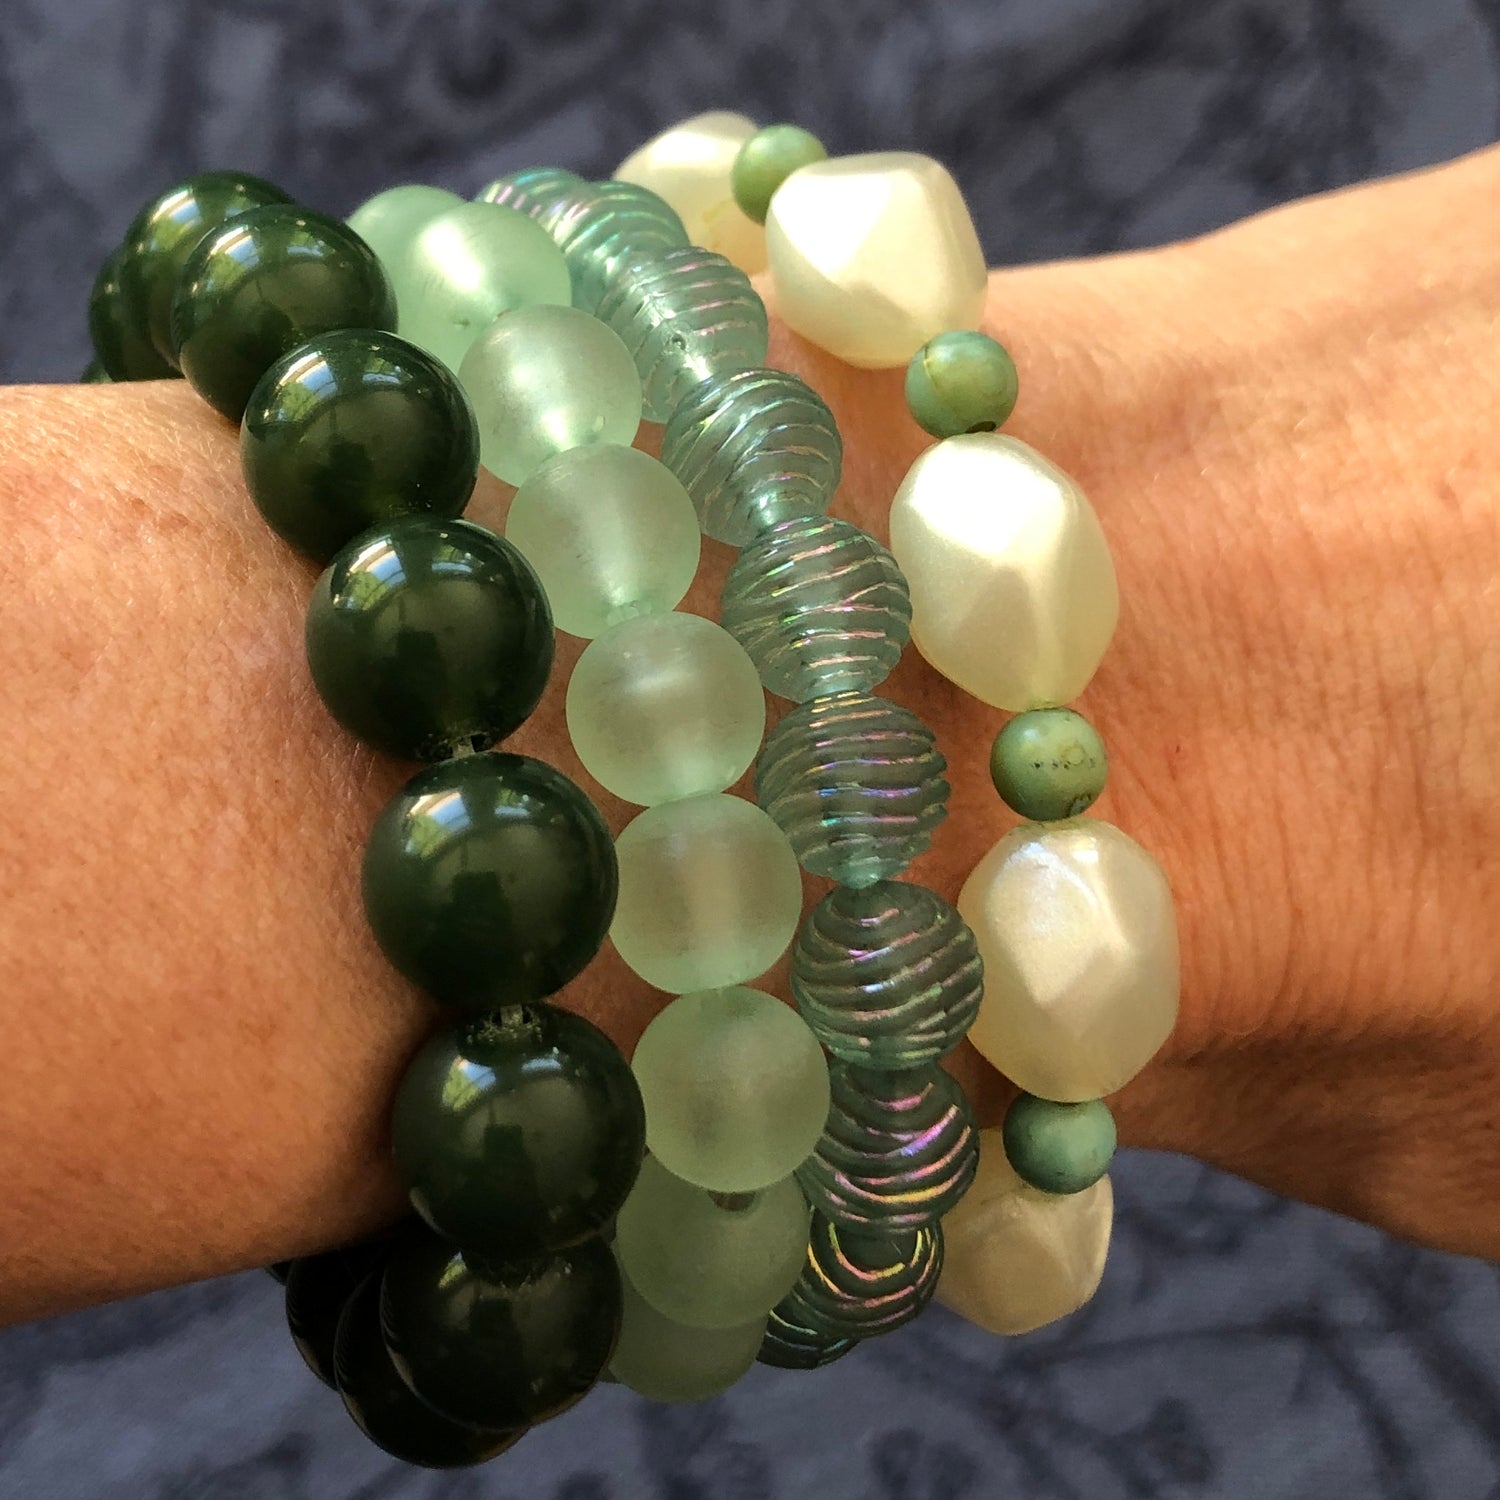 Muted Greens Stack and Stretch Bracelet Set